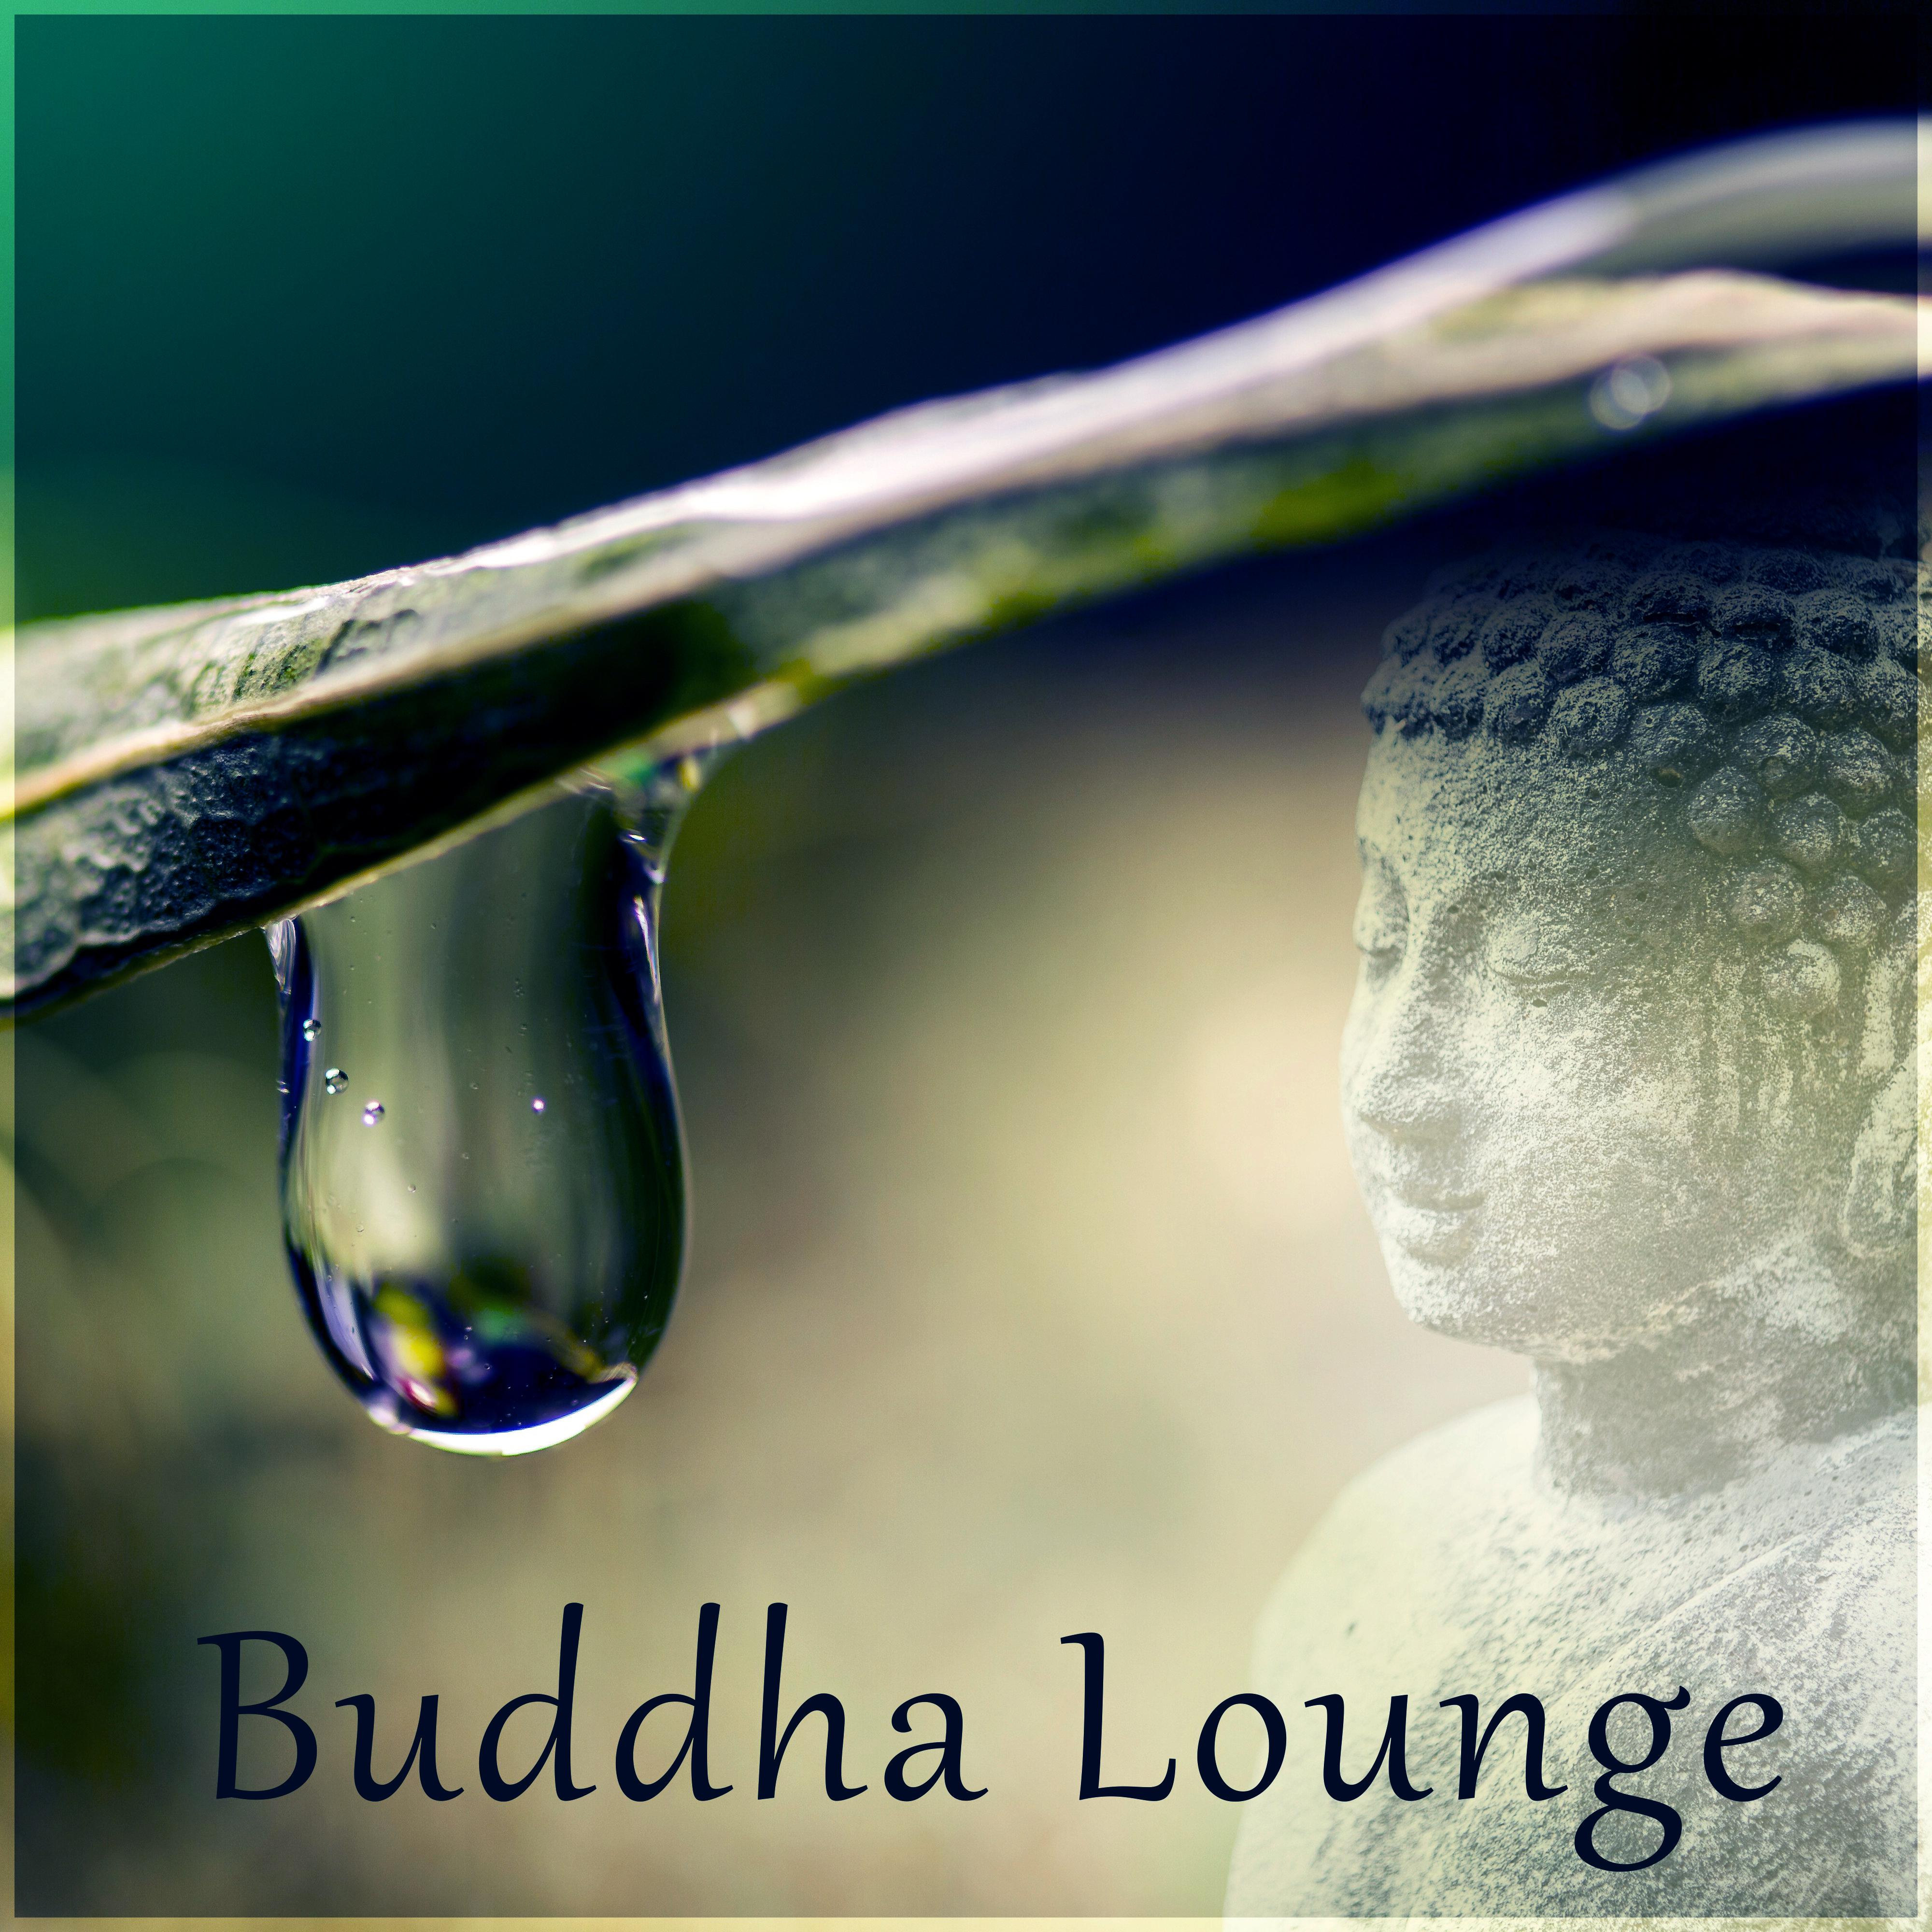 Buddha Lounge - Serenity Relaxing Music, Instrumental Music, Healing Therapy, Sounds of Nature, Zen, Relaxation, New Age, Reiki